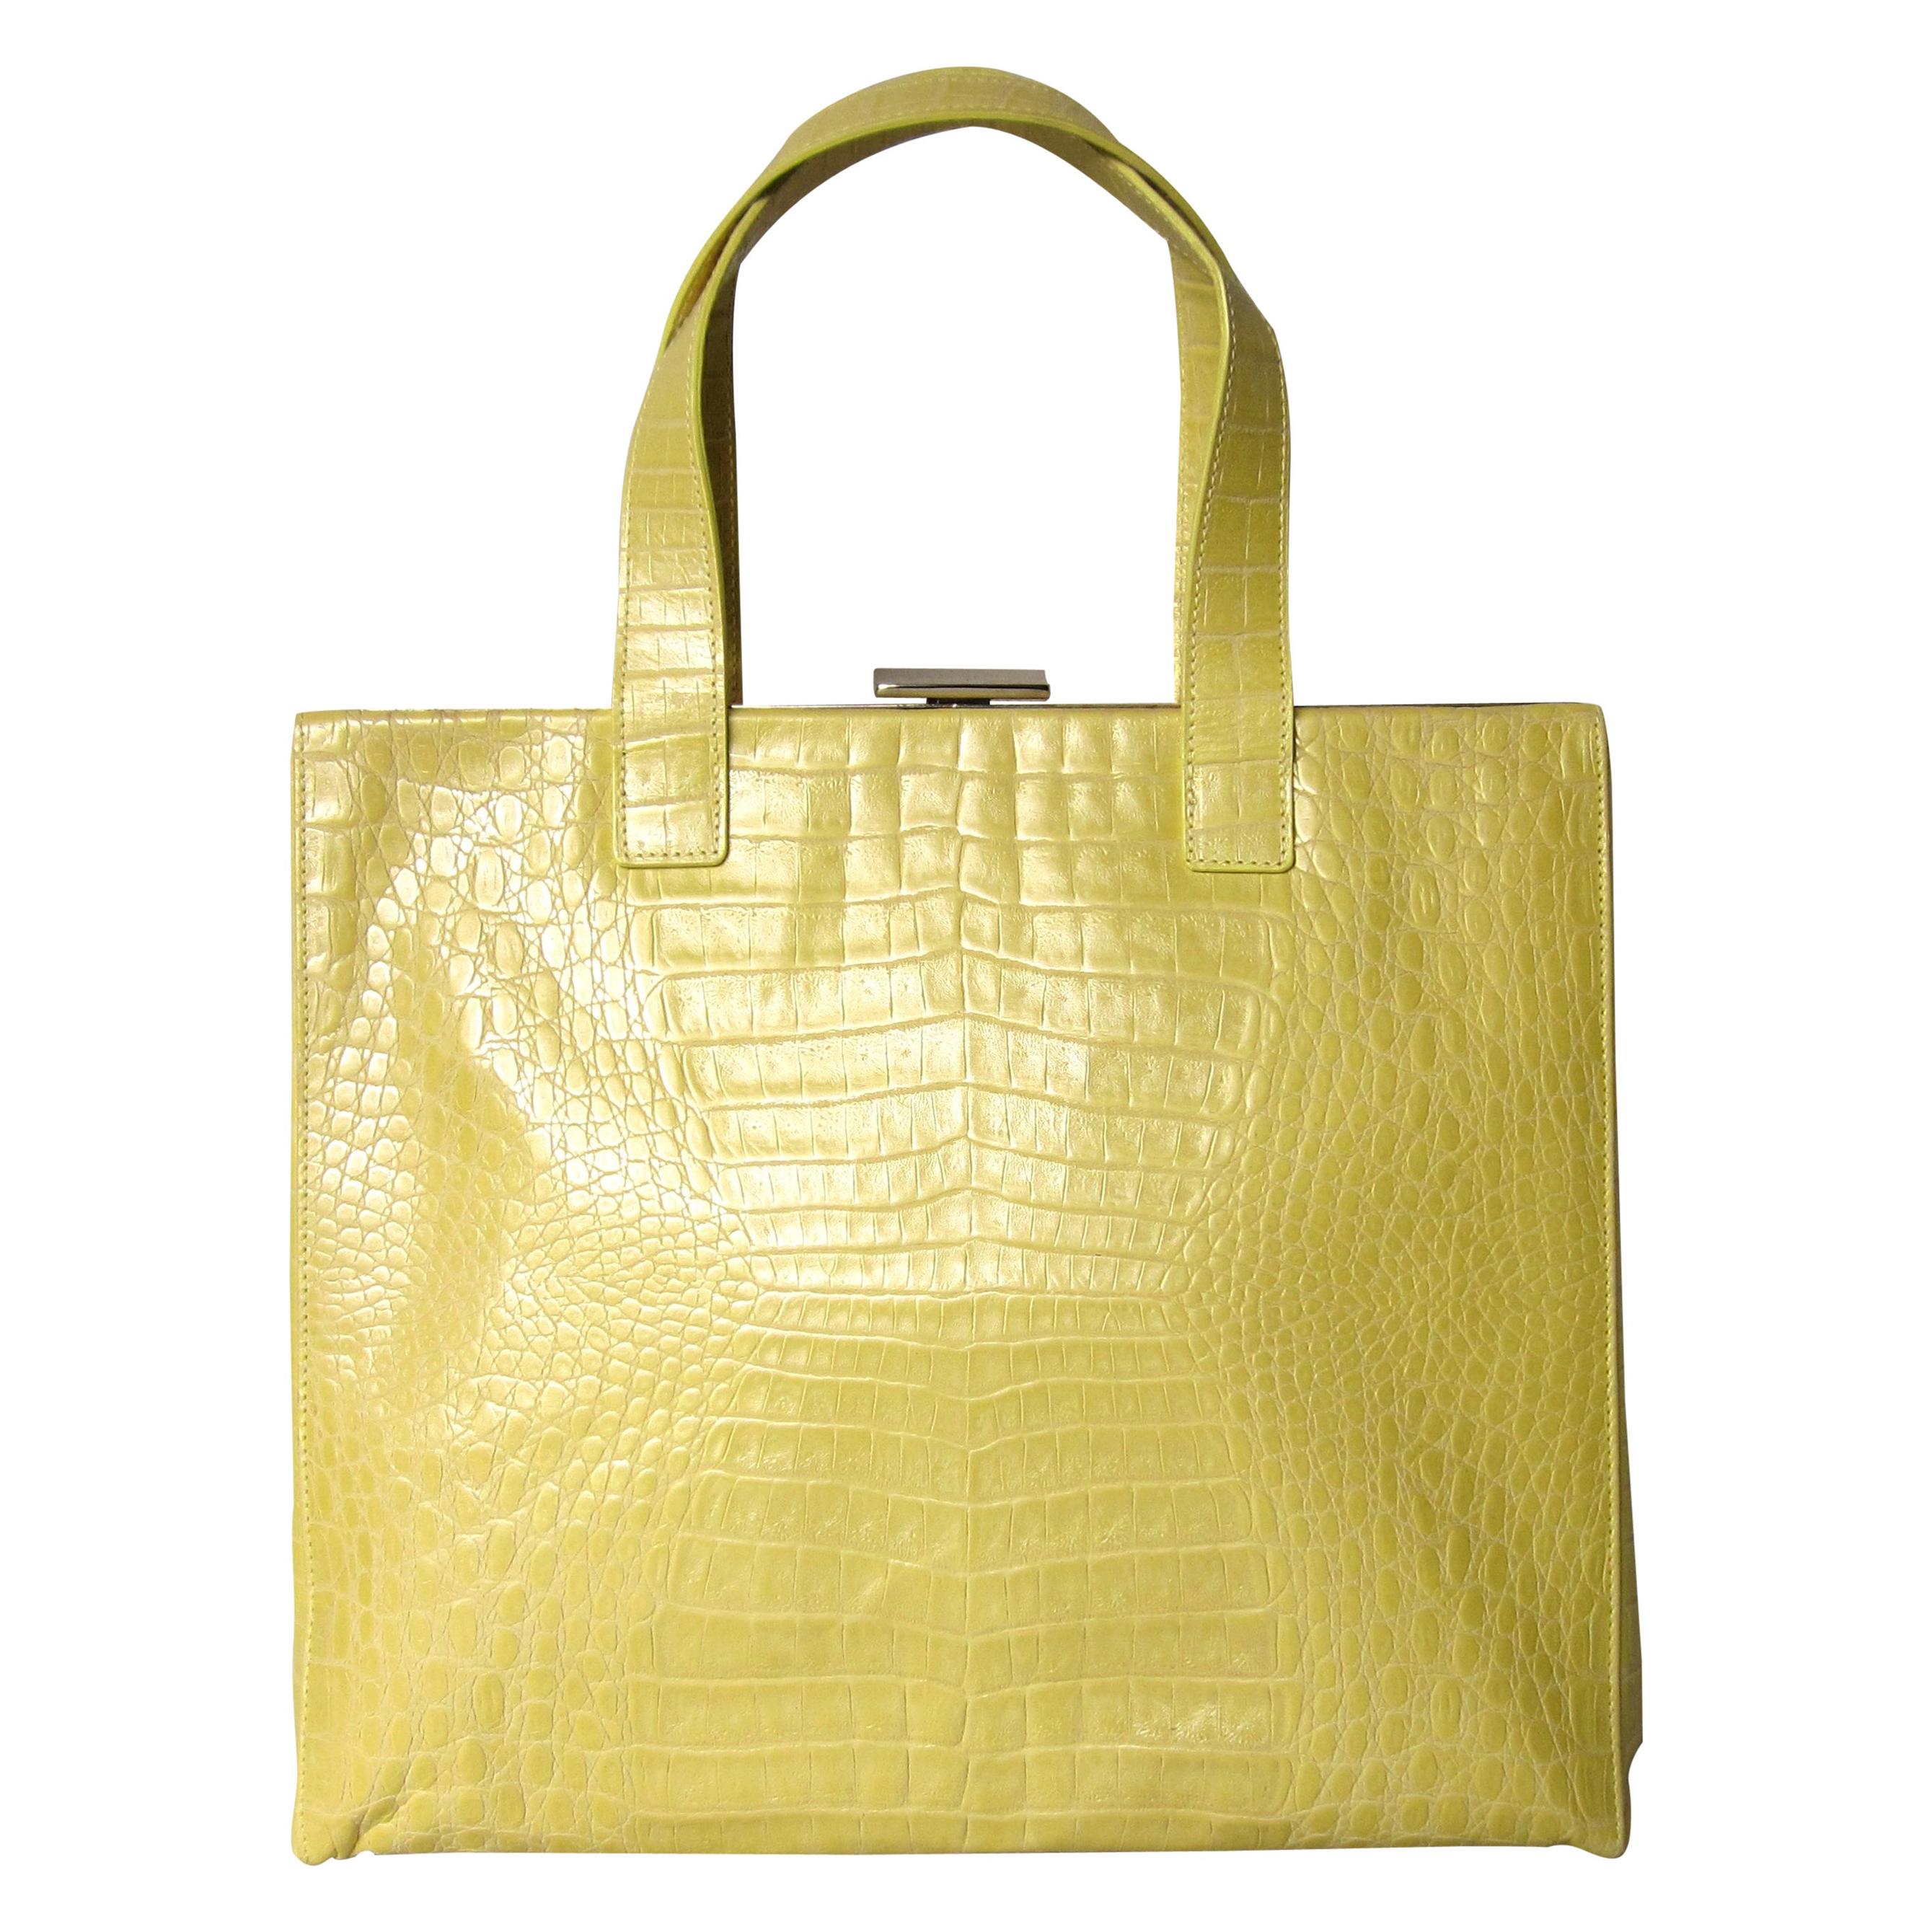 ESCADA YELLOW Pearl Croc Leather Large Handbag New, Never Used  For Sale